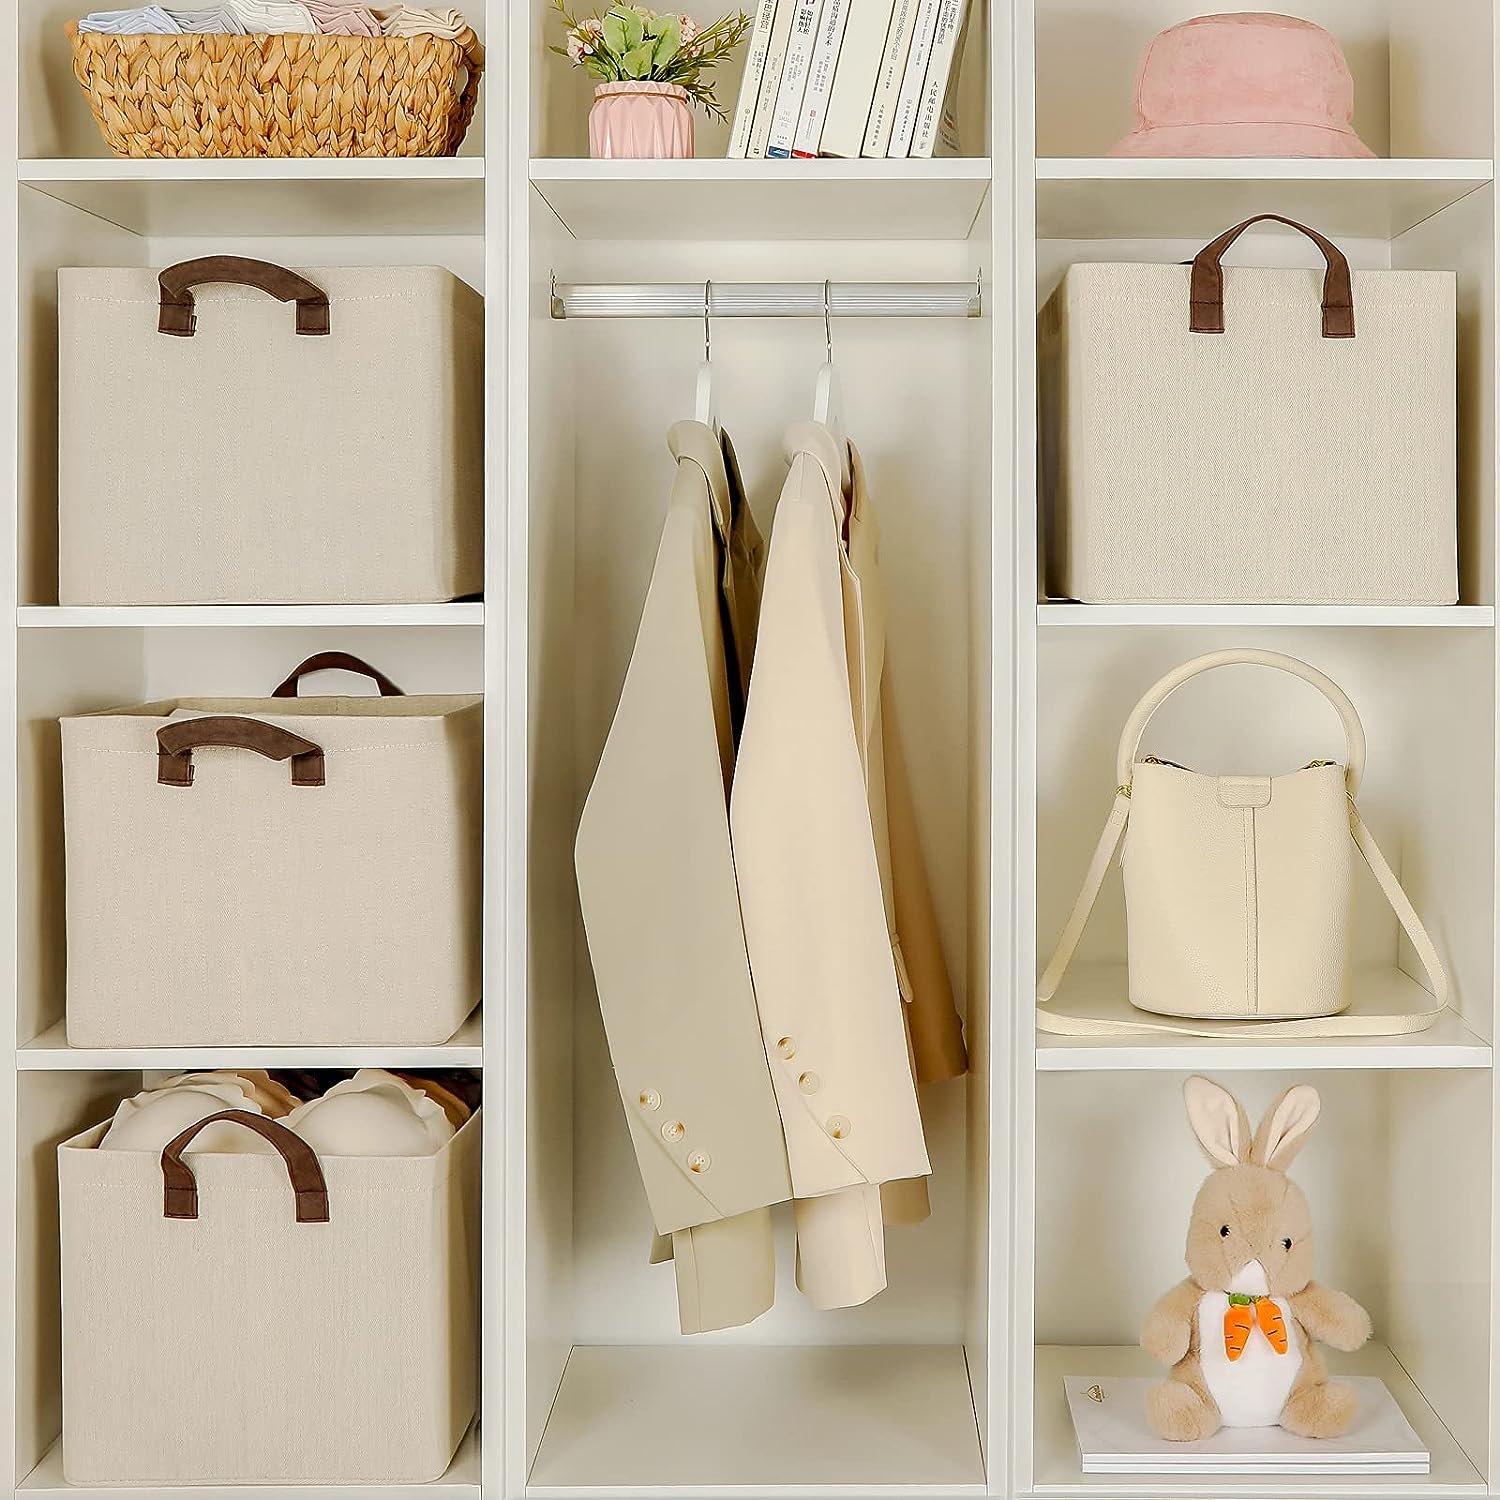 Blushbees Storage Baskets with Metal Frame for Organizing Wardrobe, Shelves, Bedroom and Closet.